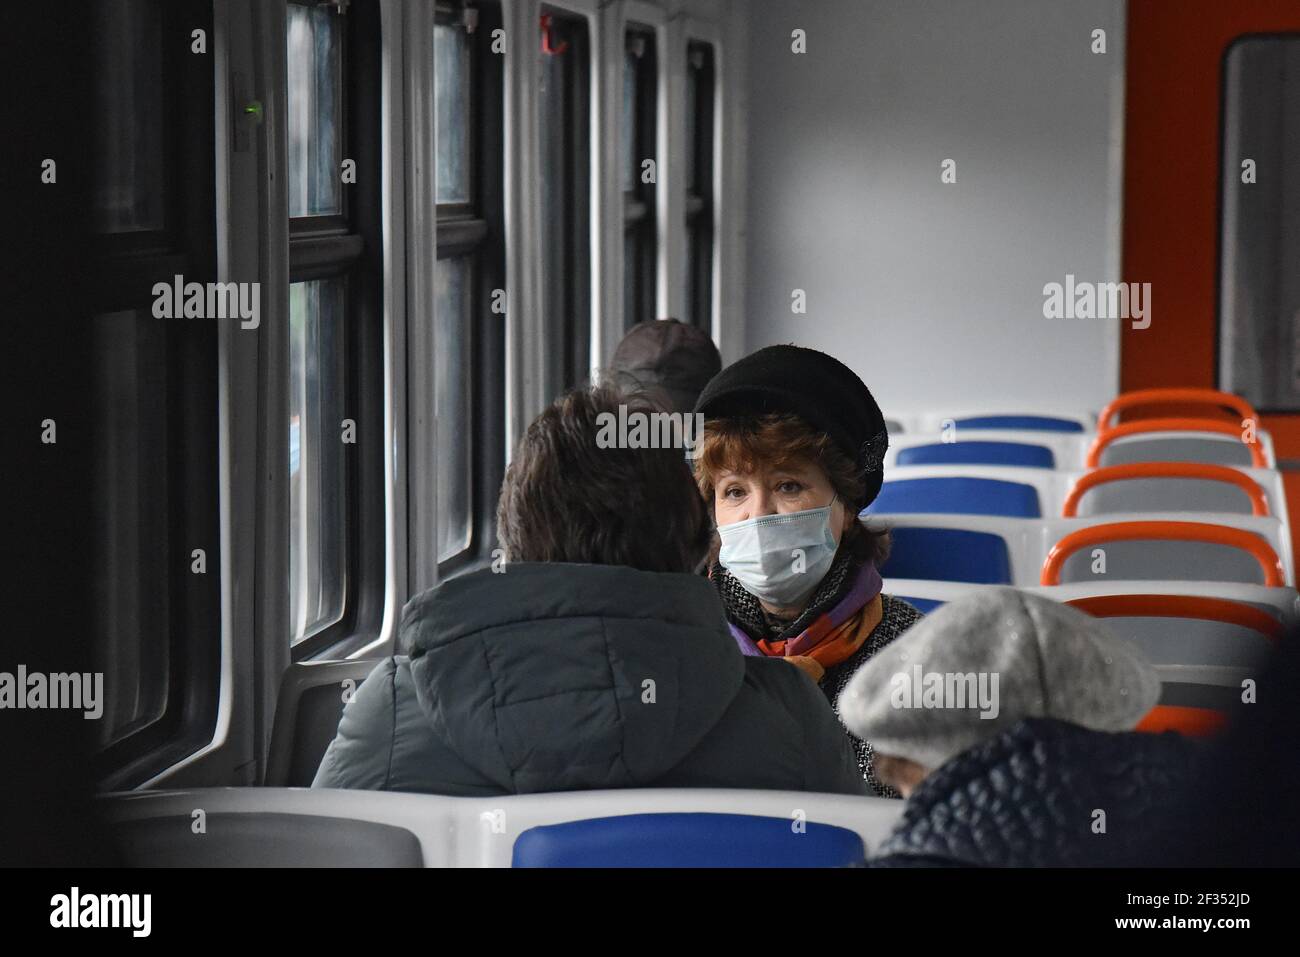 KYIV, UKRAINE - MARCH 15, 2021 - Passengers are seen on the upgraded Sviatoshyn-Bucha suburban train that has been launched as part of the City Expres Stock Photo